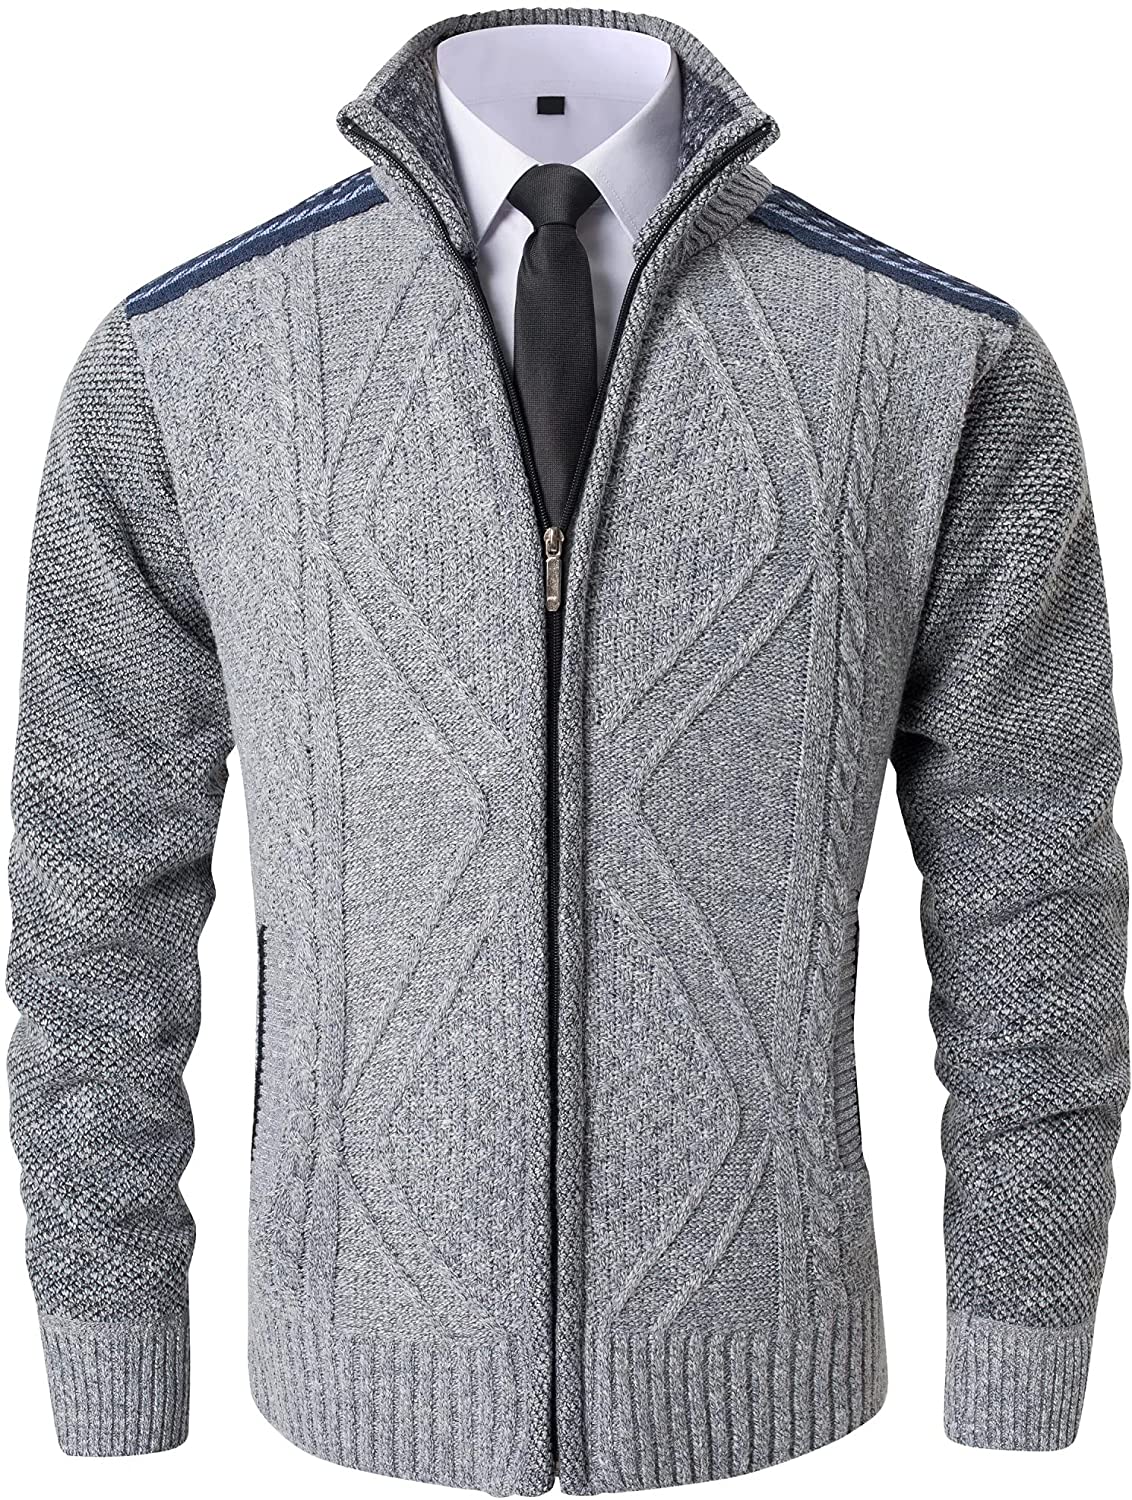 VtuAOL Men's Casual Slim Zip Up Thick Knitted Cardigan Sweaters with Pockets 